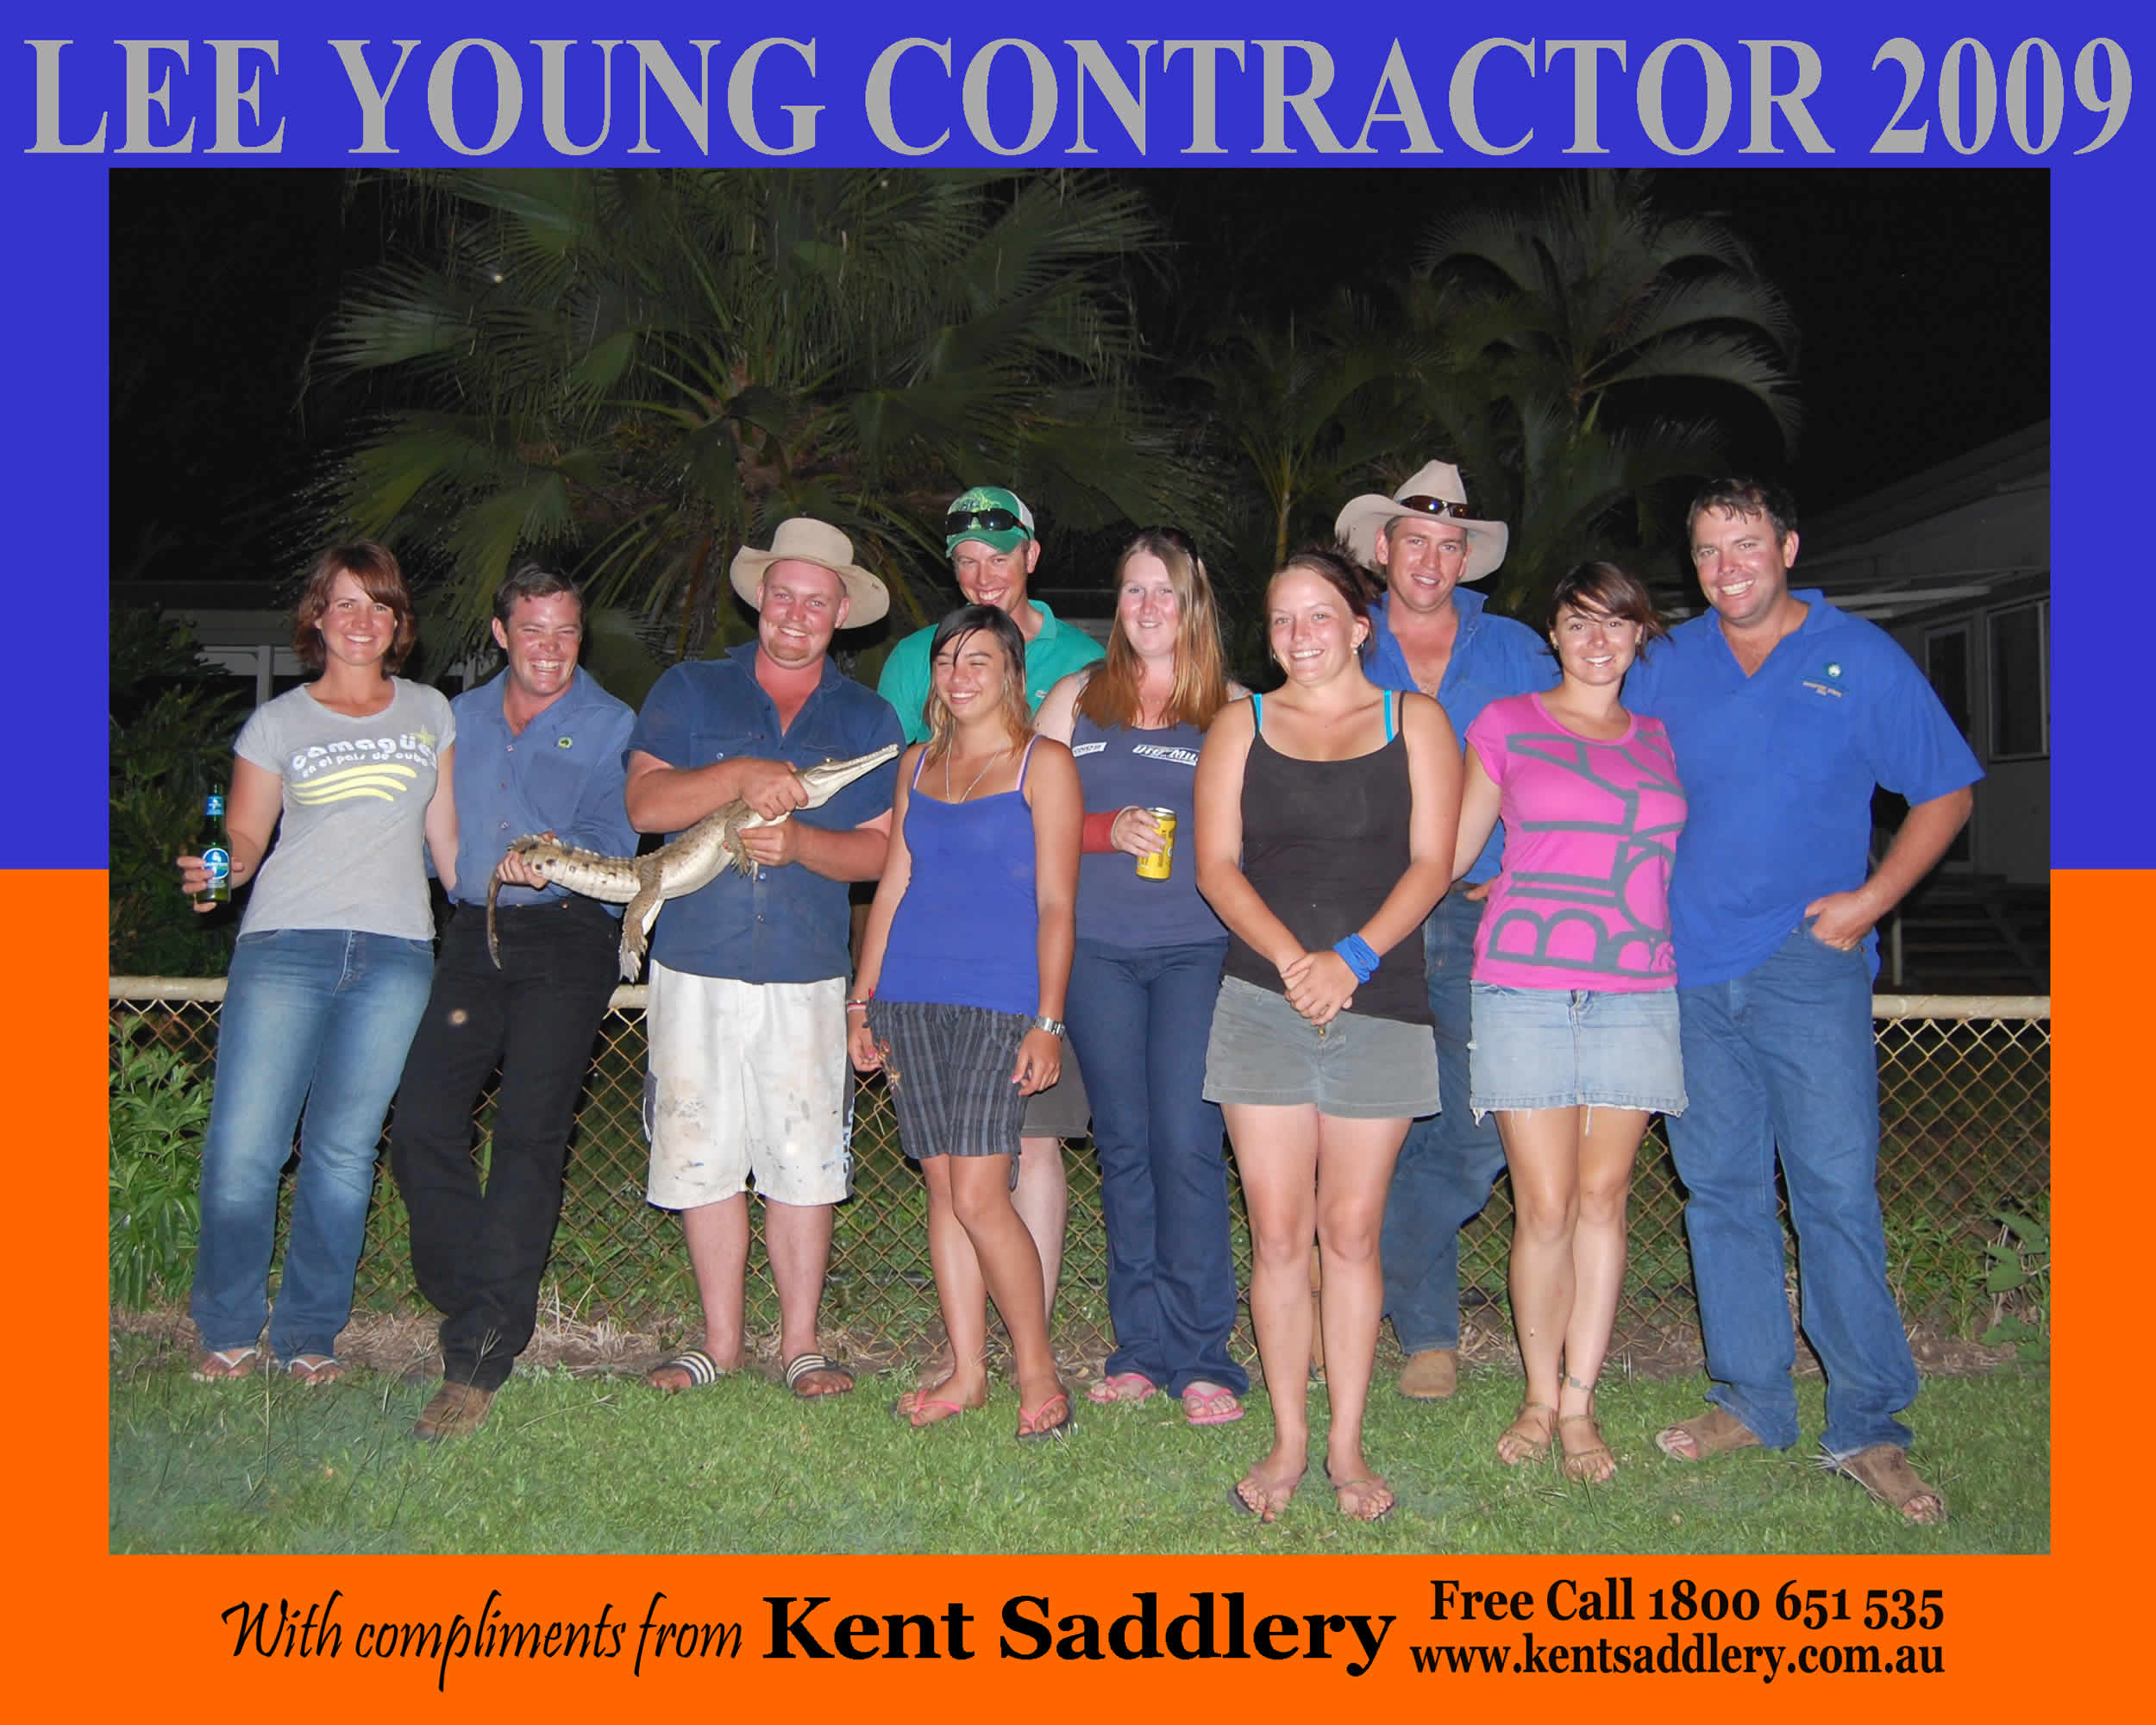 Drovers & Contractors - Lee Young Contractor 5